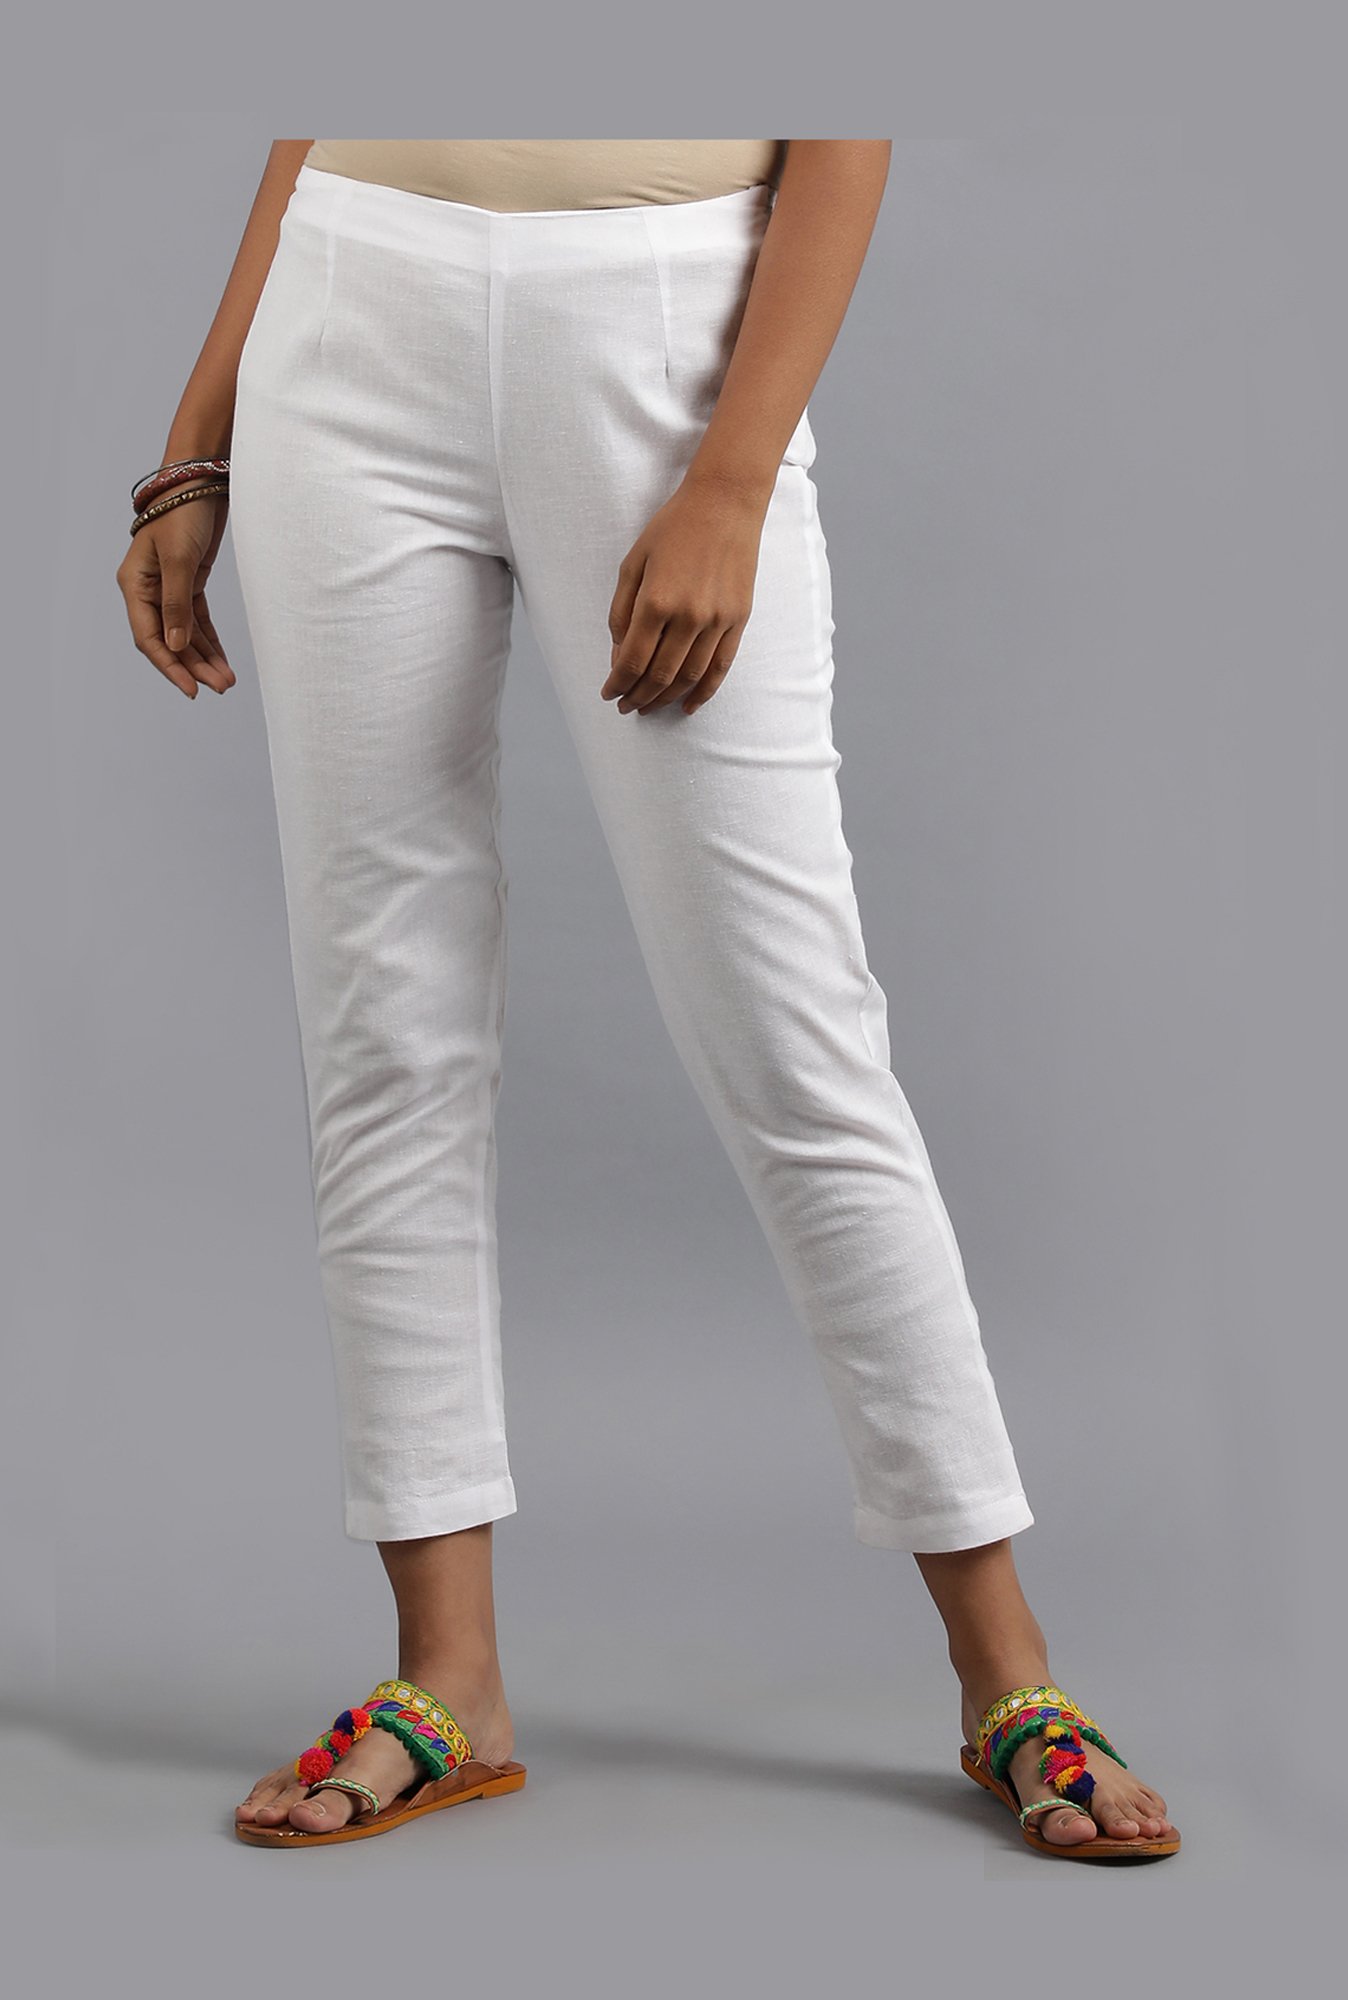 Gipsy Trousers and Pants  Buy Gipsy Casual Linen Ladies Pant for Women  Online  Nykaa Fashion